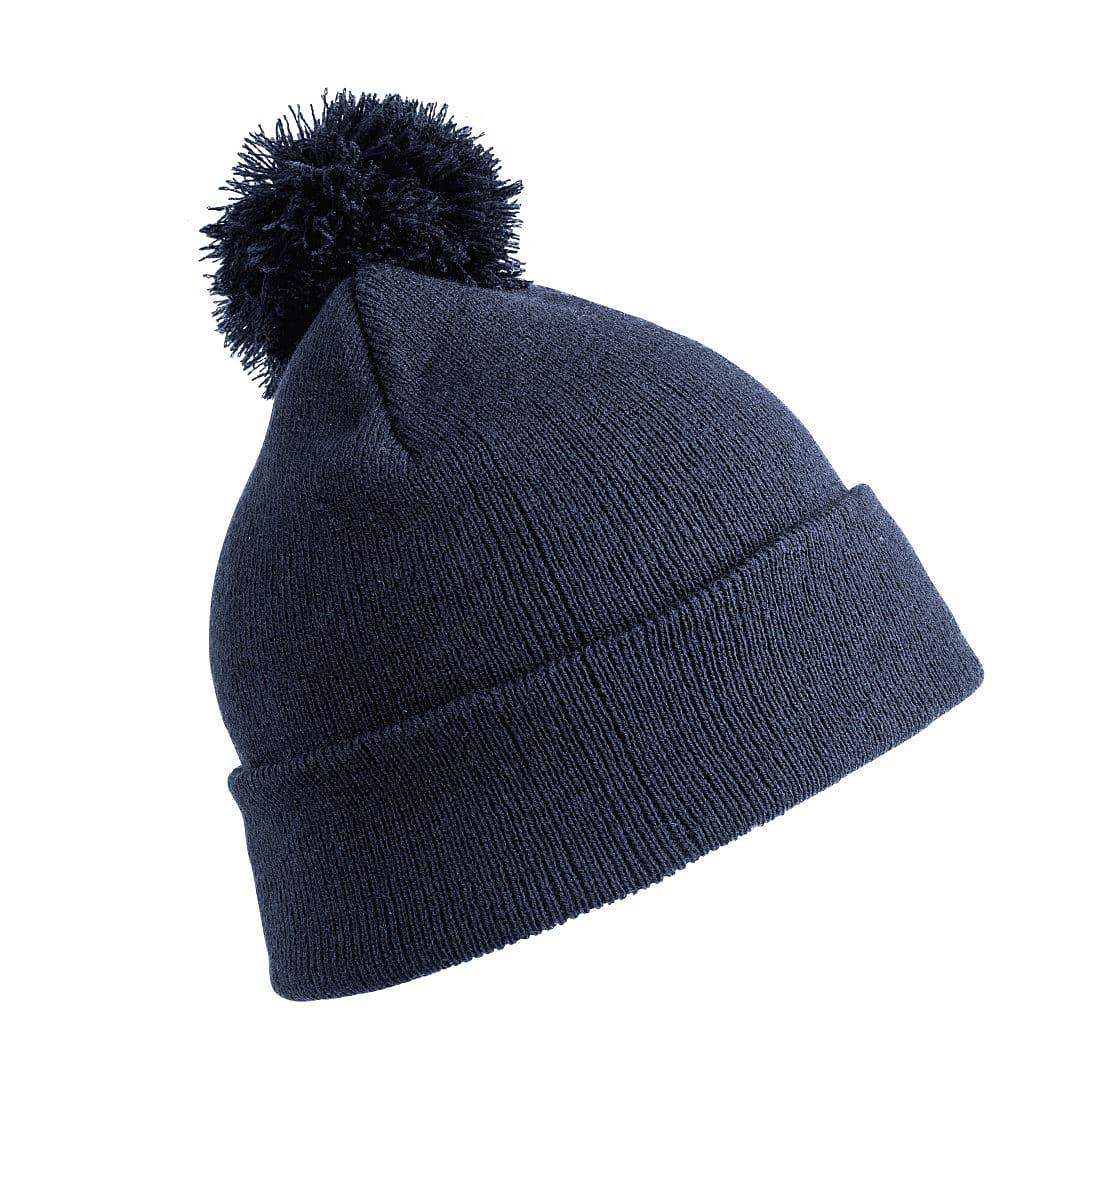 Result Winter Jr PomPom Beanie Hat in Navy Blue (Product Code: RC028J)